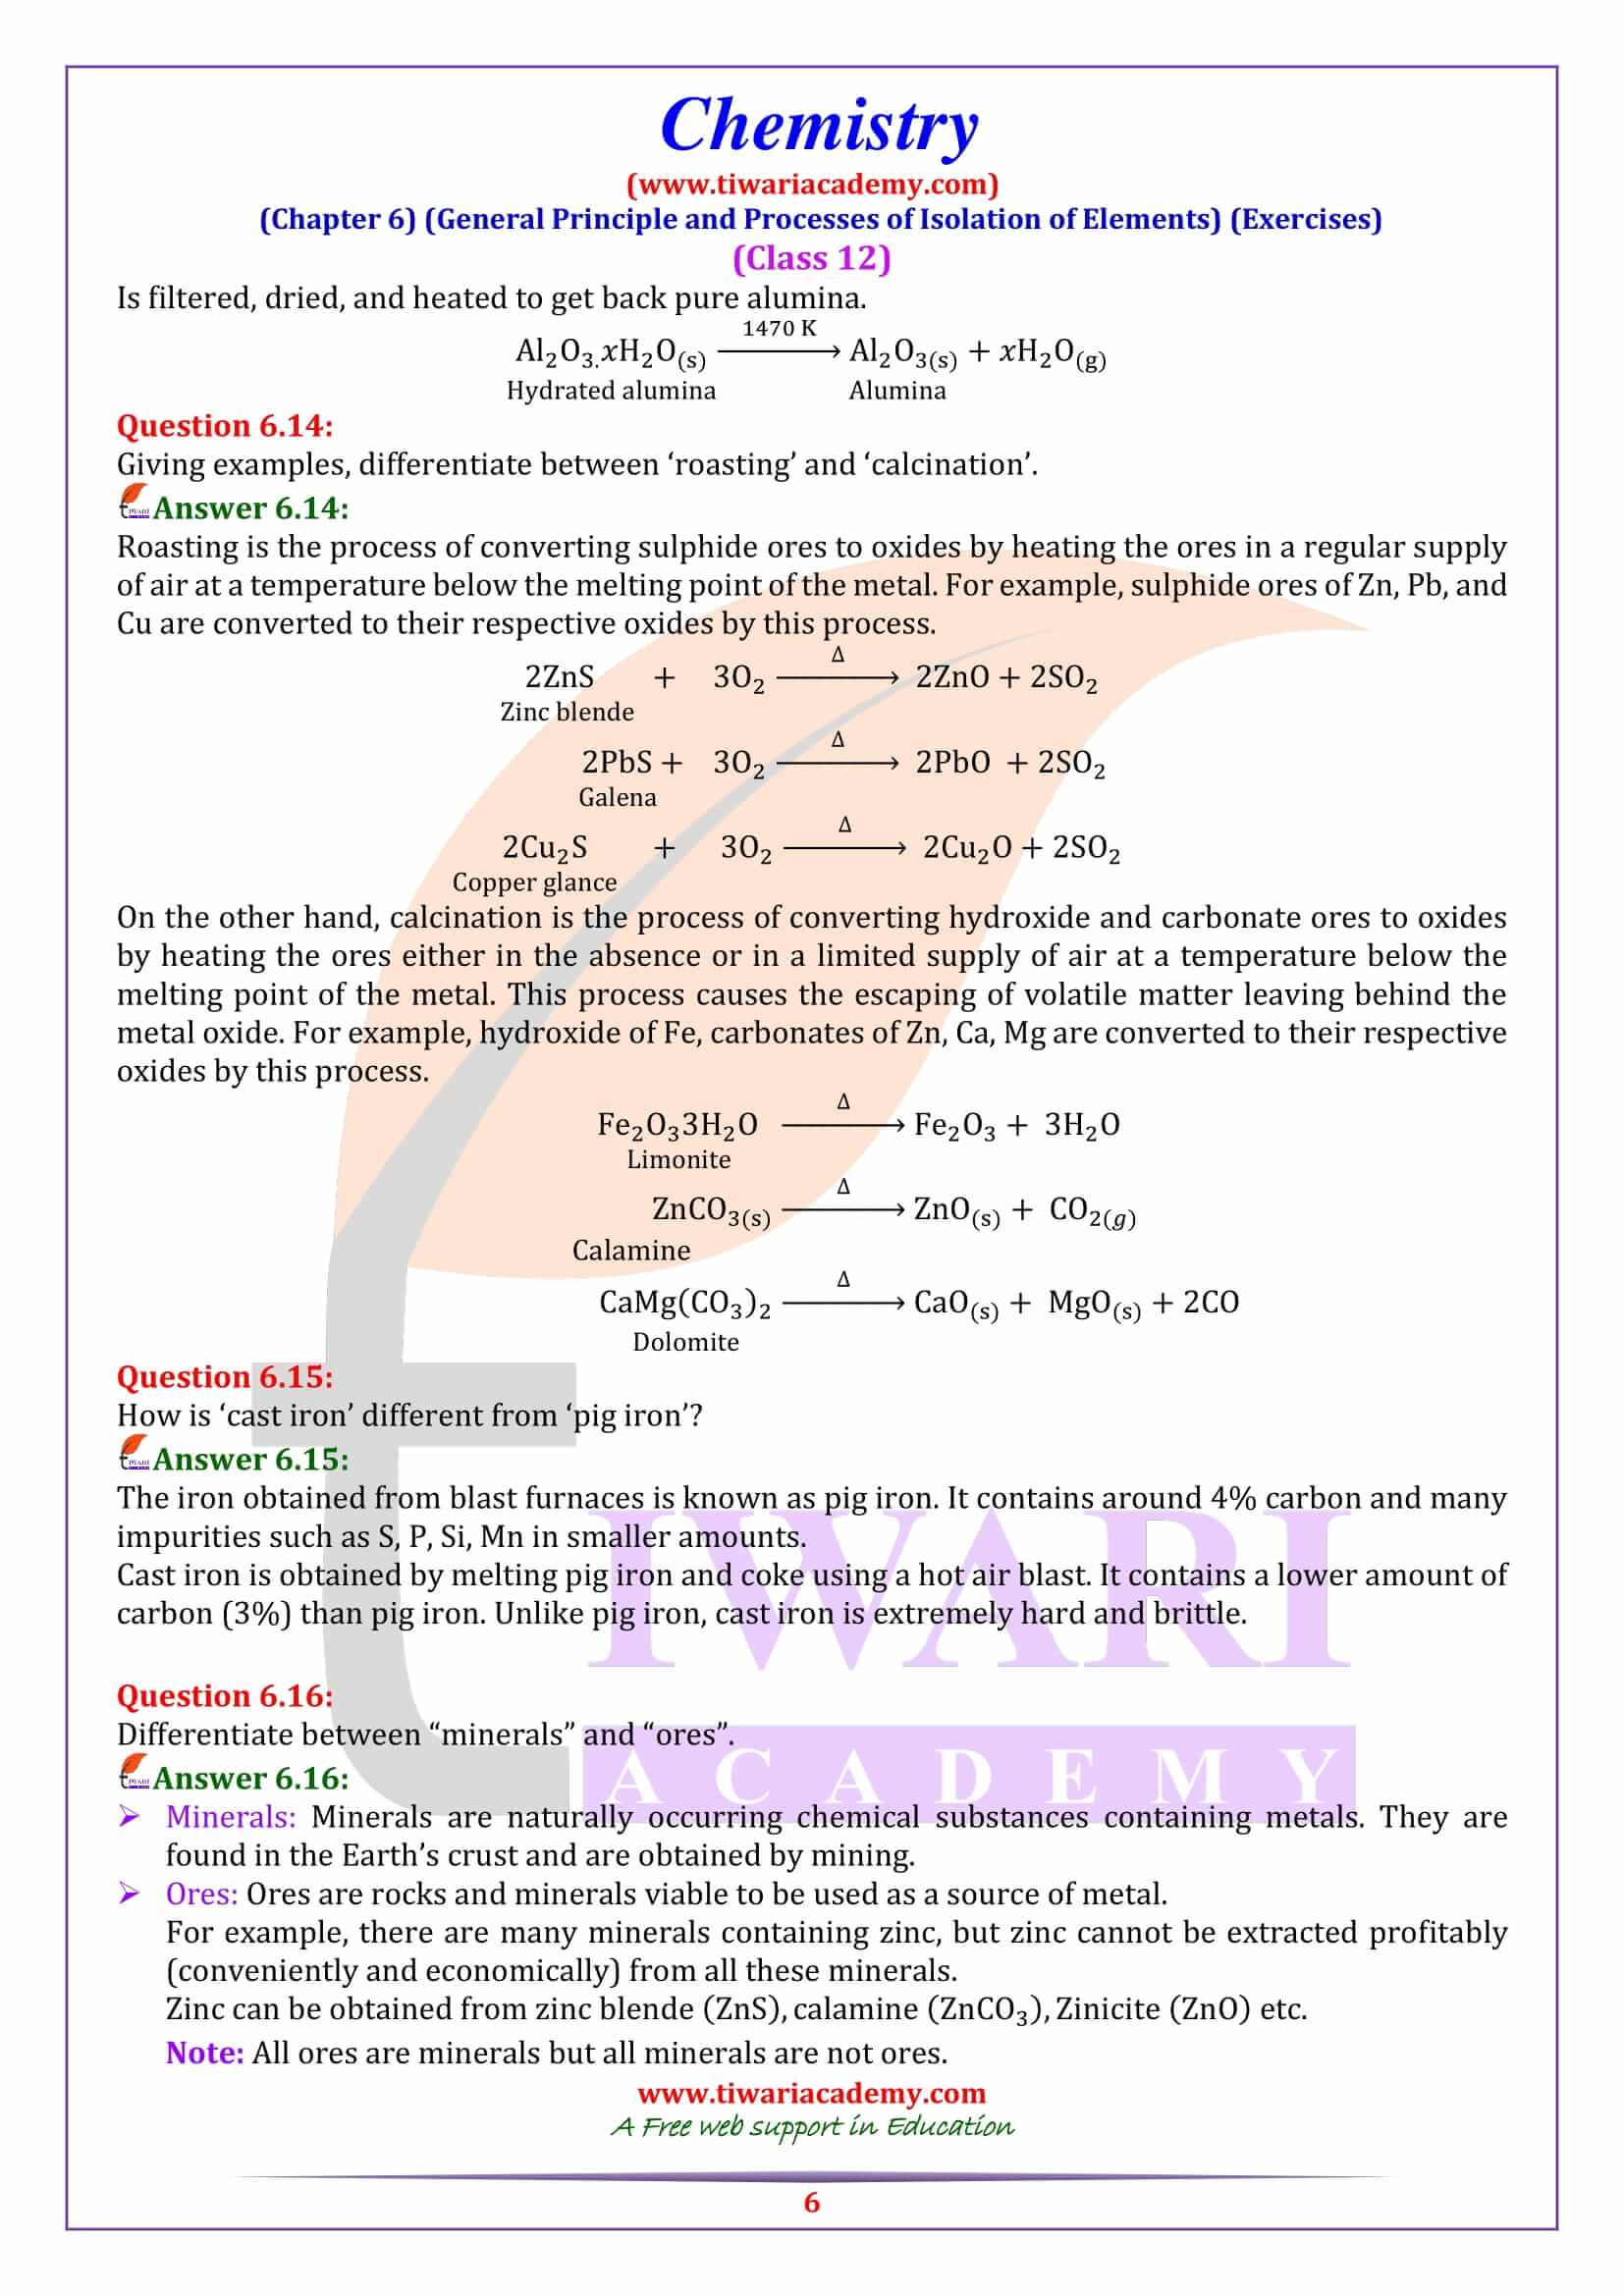 NCERT Solutions for Class 12 Chemistry Chapter 6 question answers